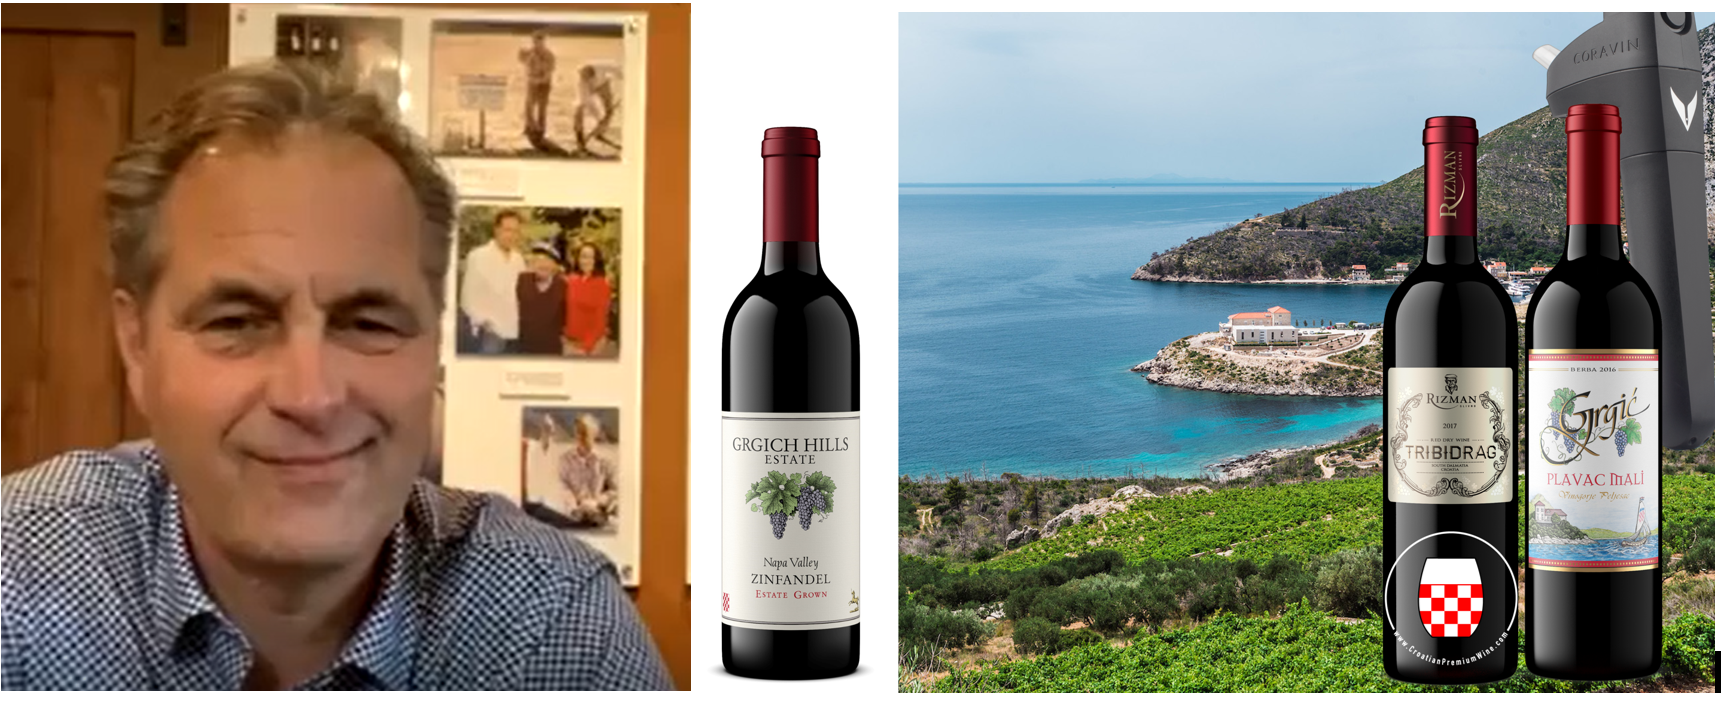  Winemaker of Grgich Hills in US dives into Tribidrag’s history on National Zinfandel Day